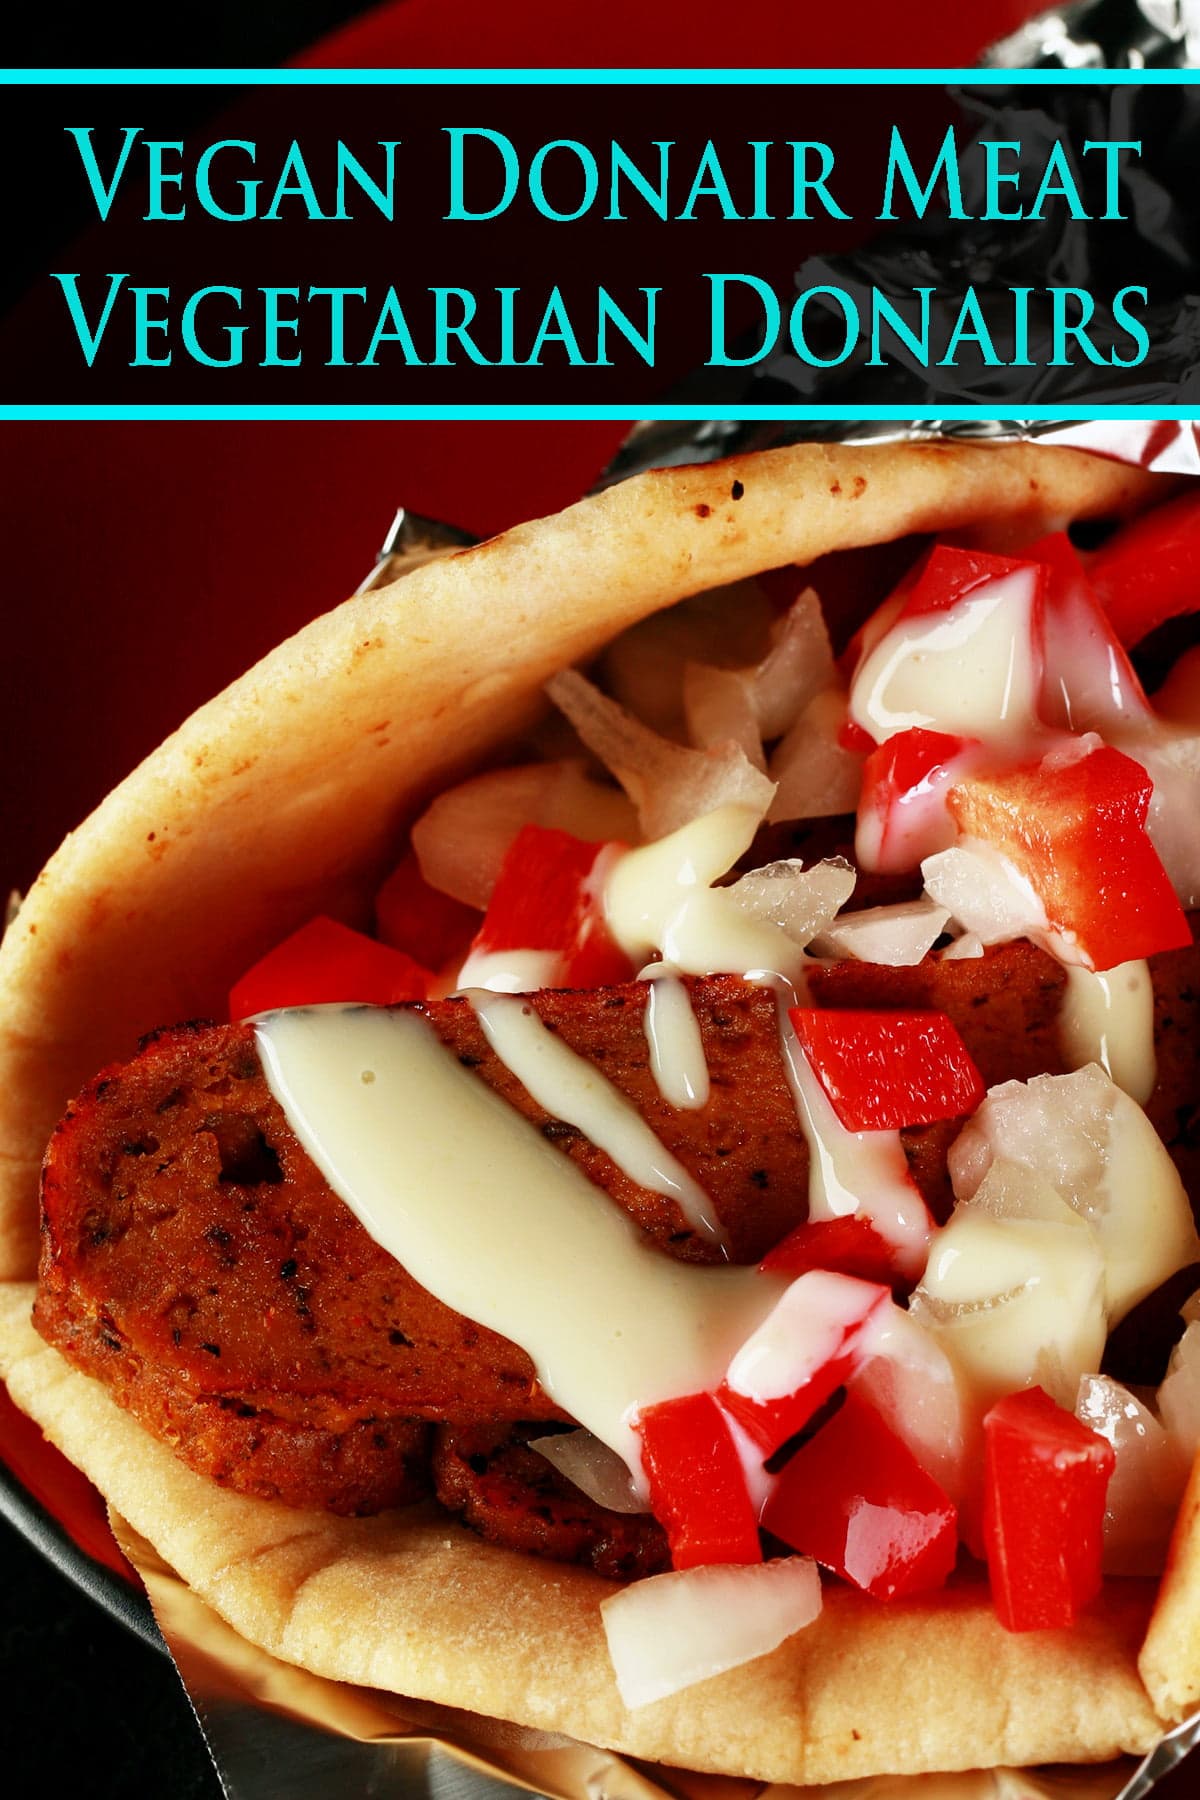 Close up view of a vegetarian donair - a pita bread folded around a pile of vegan donair "meat" slices, chopped red peppers, and donair sauce drizzled on top.